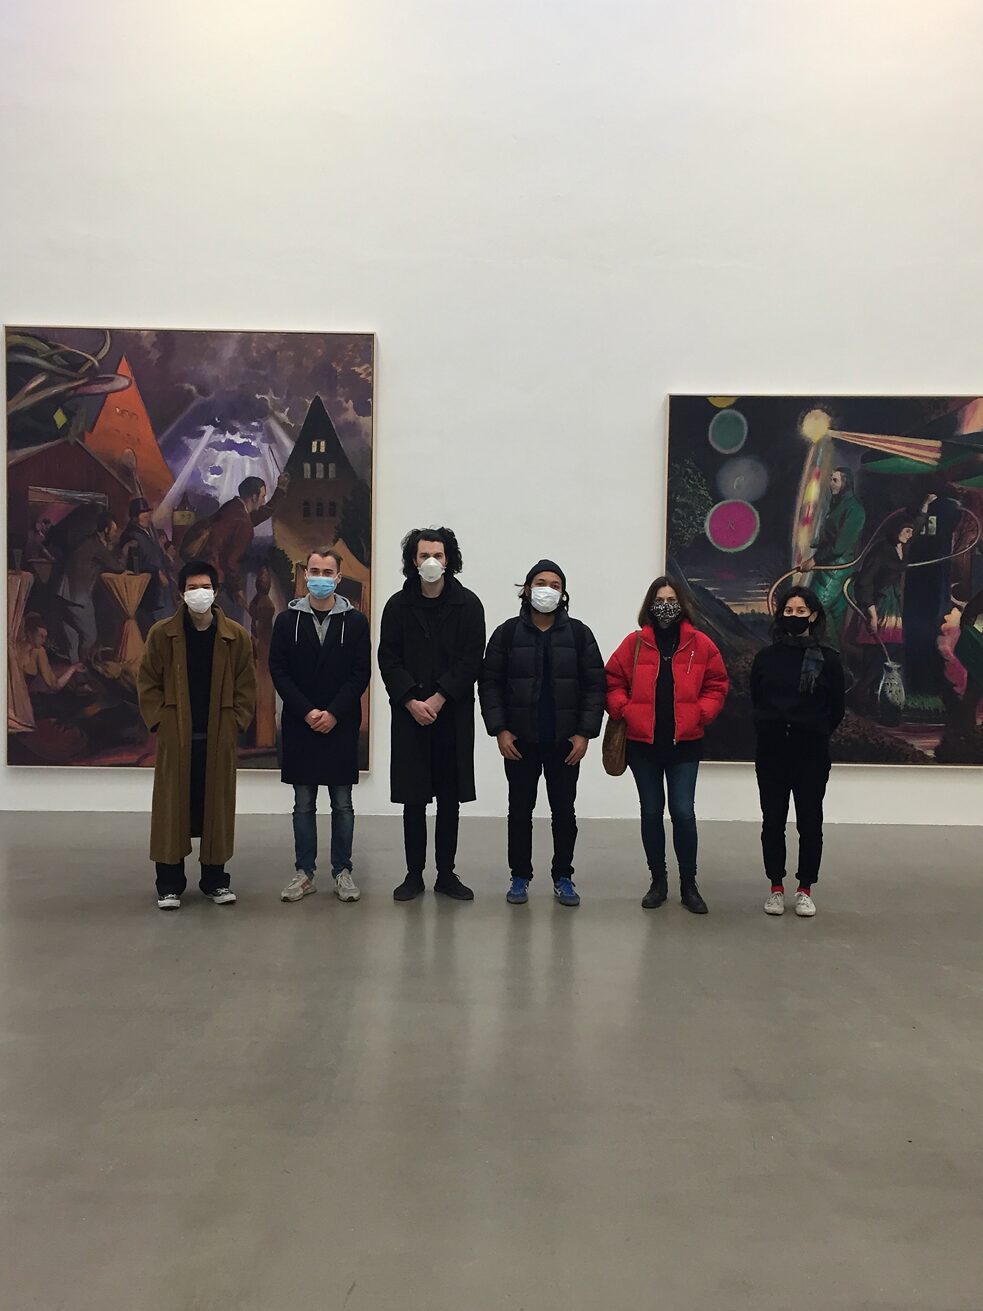 Myself and fellow residents viewing the newly opened Neo Rauch exhibition at Eigen+Art Gallery in the Spinnerei